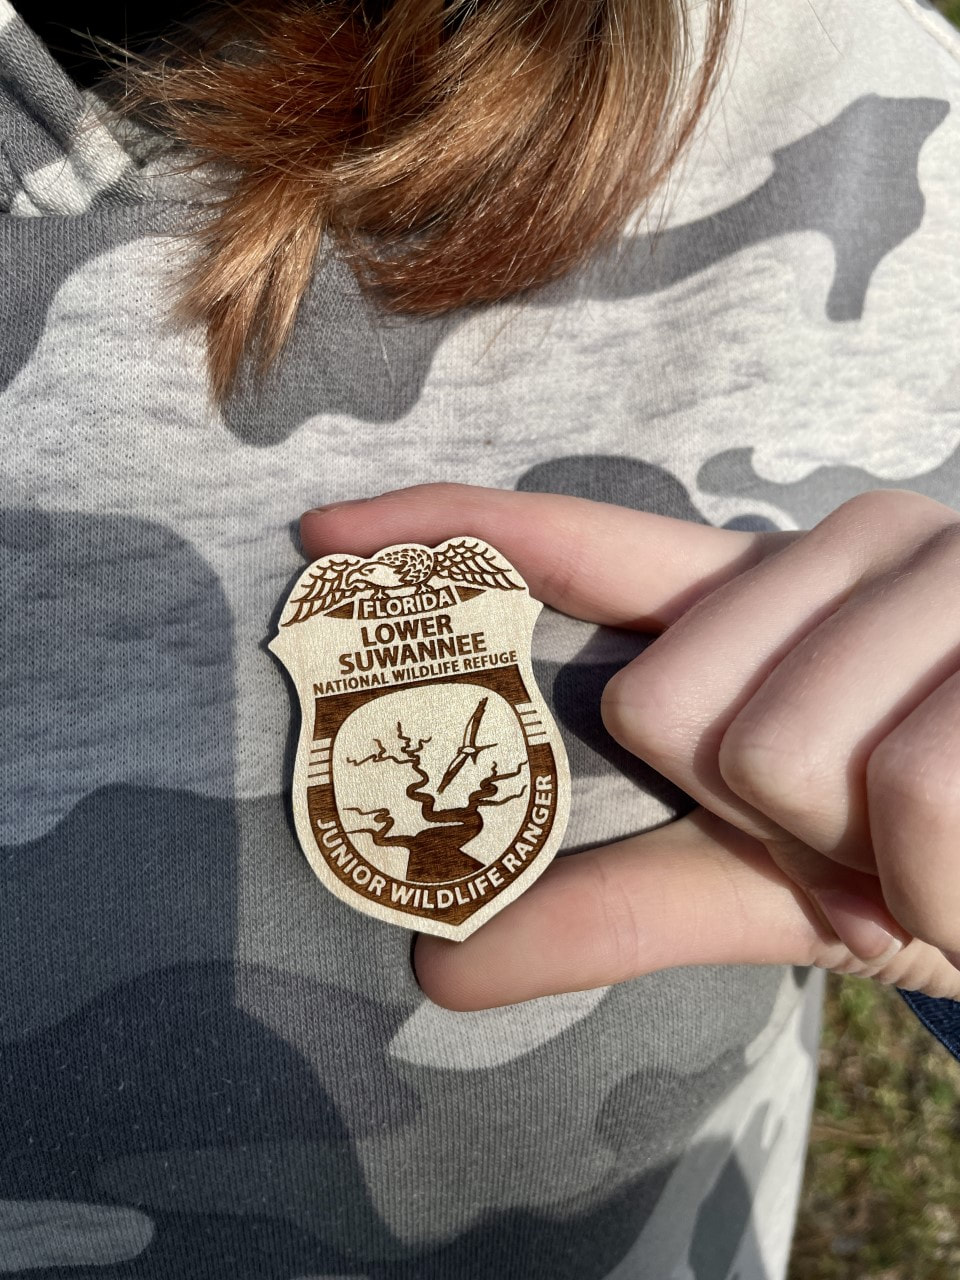 Picture of The Junior Ranger badge for the Lower Suwannee NWR